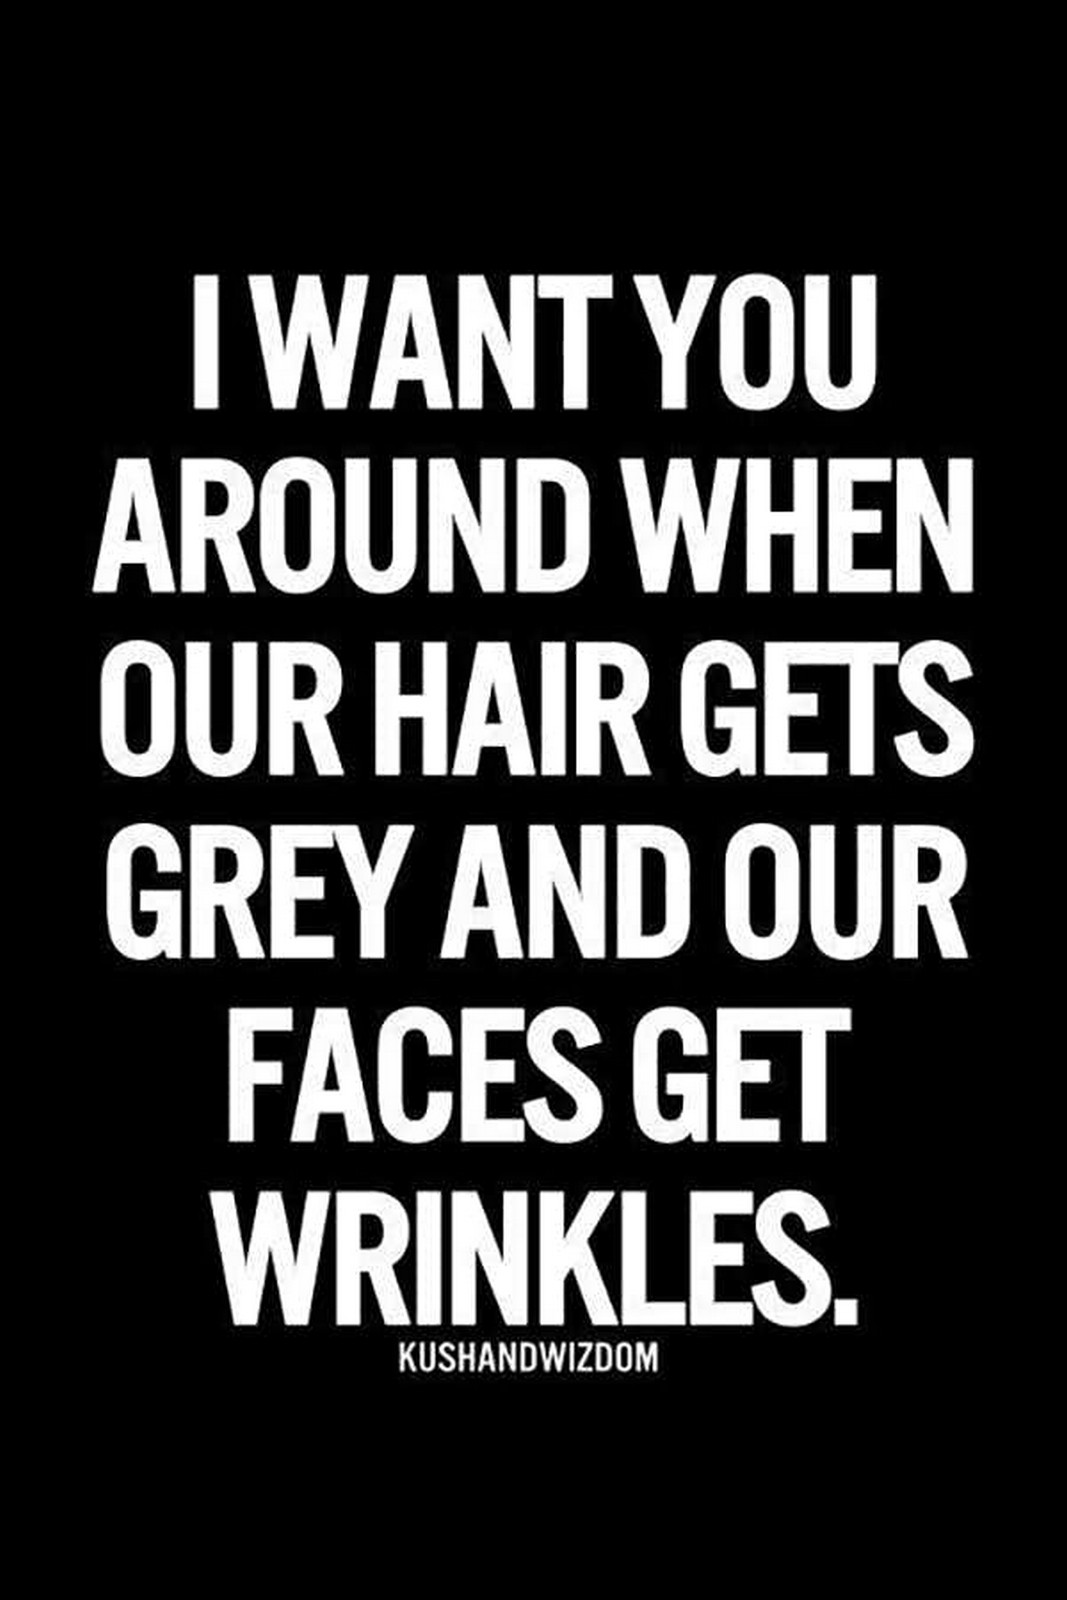 55 Romantic Quotes - "I want you around when our hair gets grey and our faces get wrinkles."